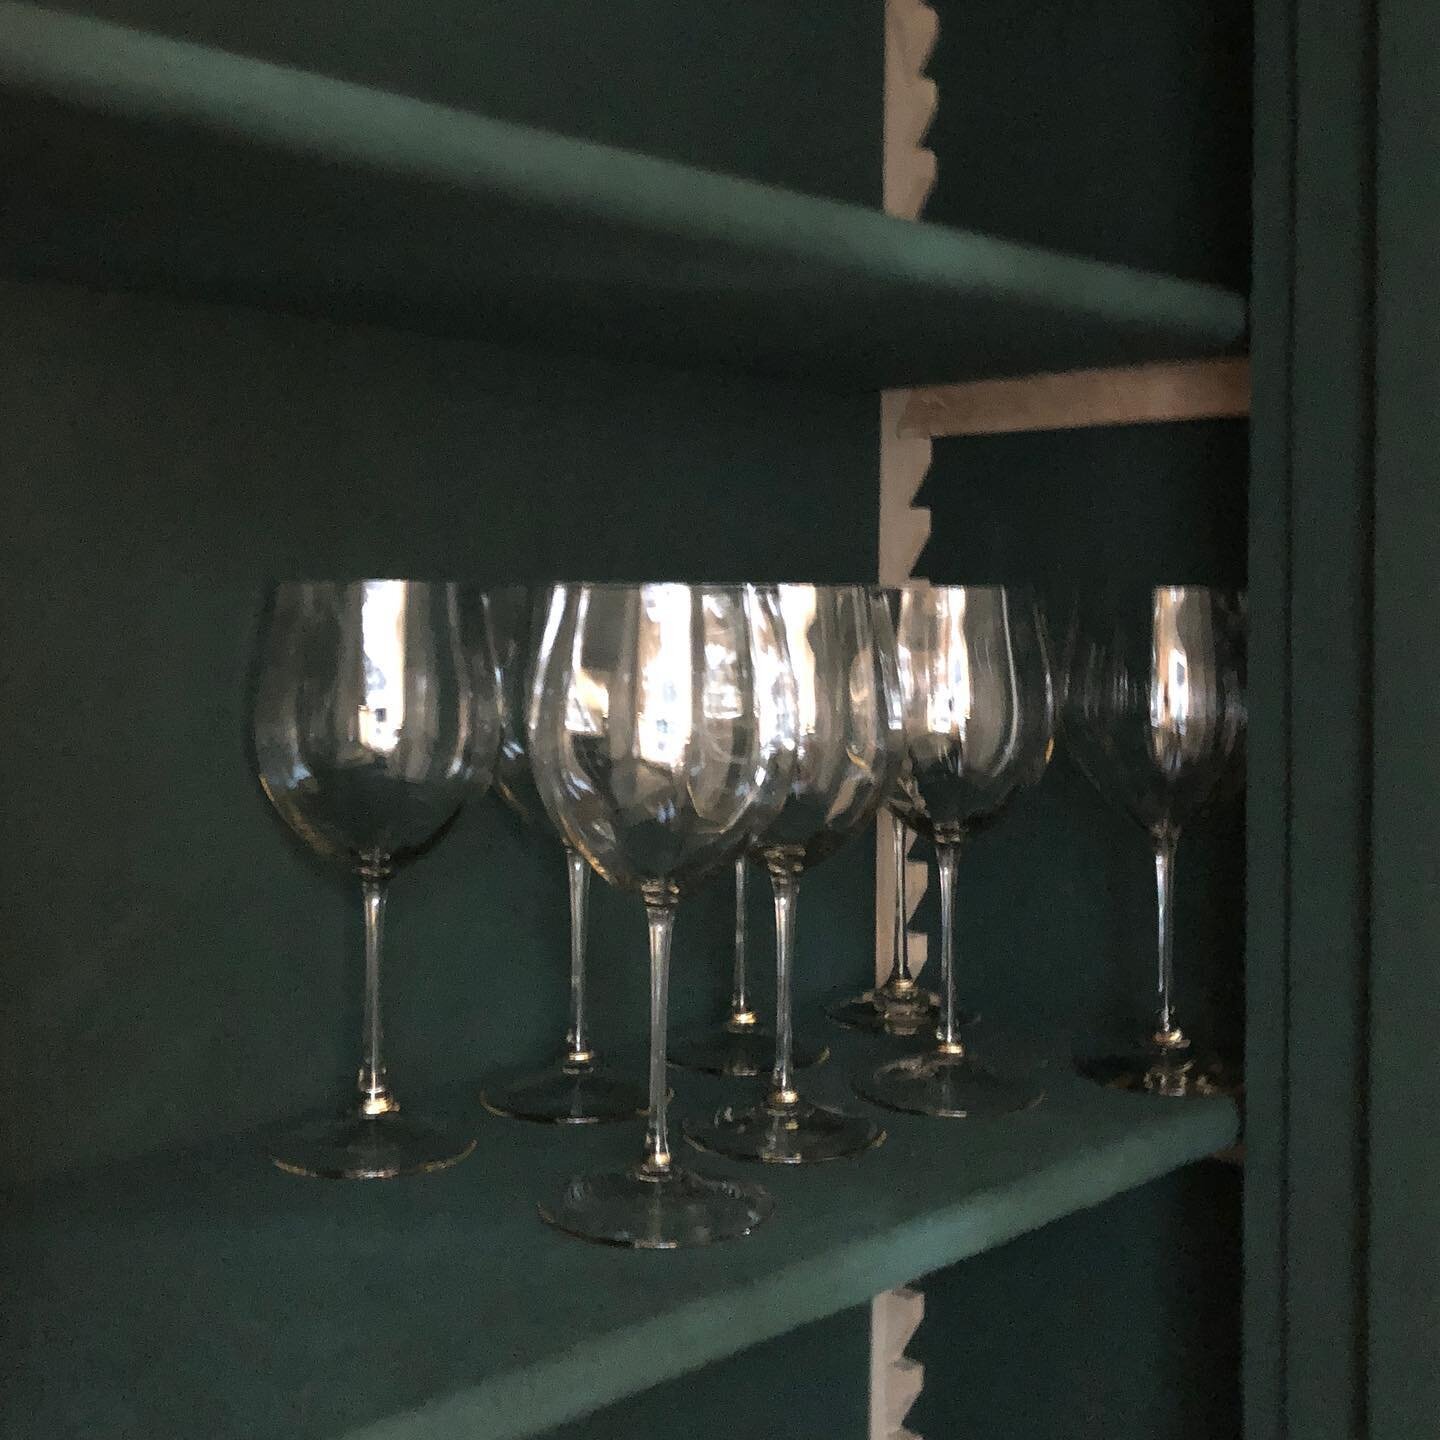 Favorite details. Lined cabinetry for glassware, porcelain and silver collections. Quality inside and out. #bespokefurniture #custoninteriors #silverchest #fittedcabinetry #luxurystorage #finehomedetails